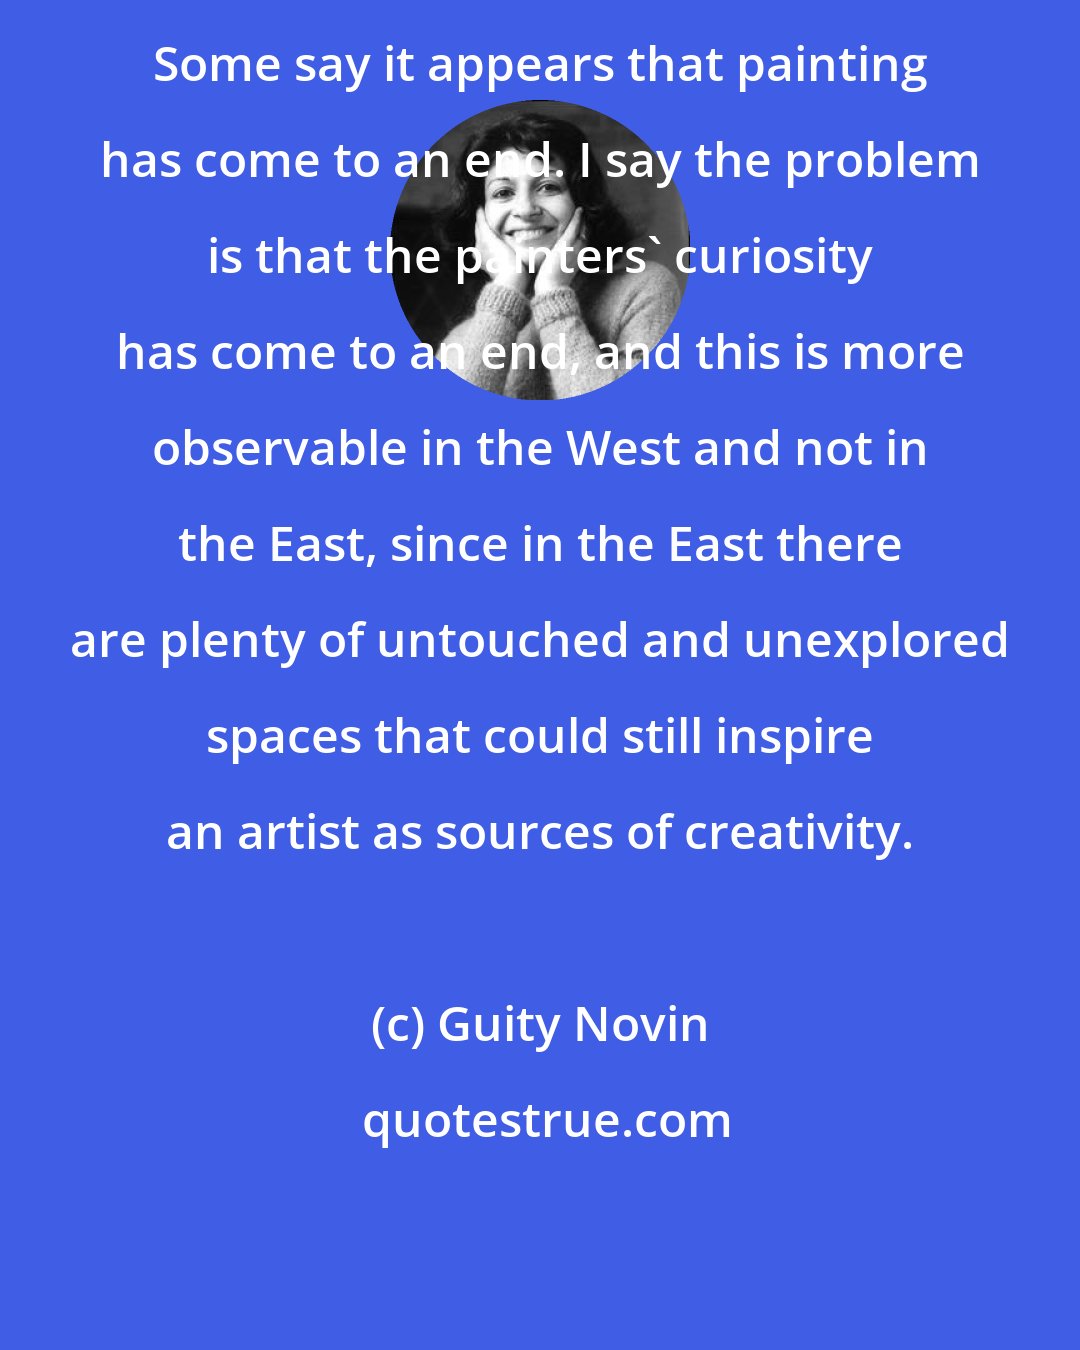 Guity Novin: Some say it appears that painting has come to an end. I say the problem is that the painters' curiosity has come to an end, and this is more observable in the West and not in the East, since in the East there are plenty of untouched and unexplored spaces that could still inspire an artist as sources of creativity.